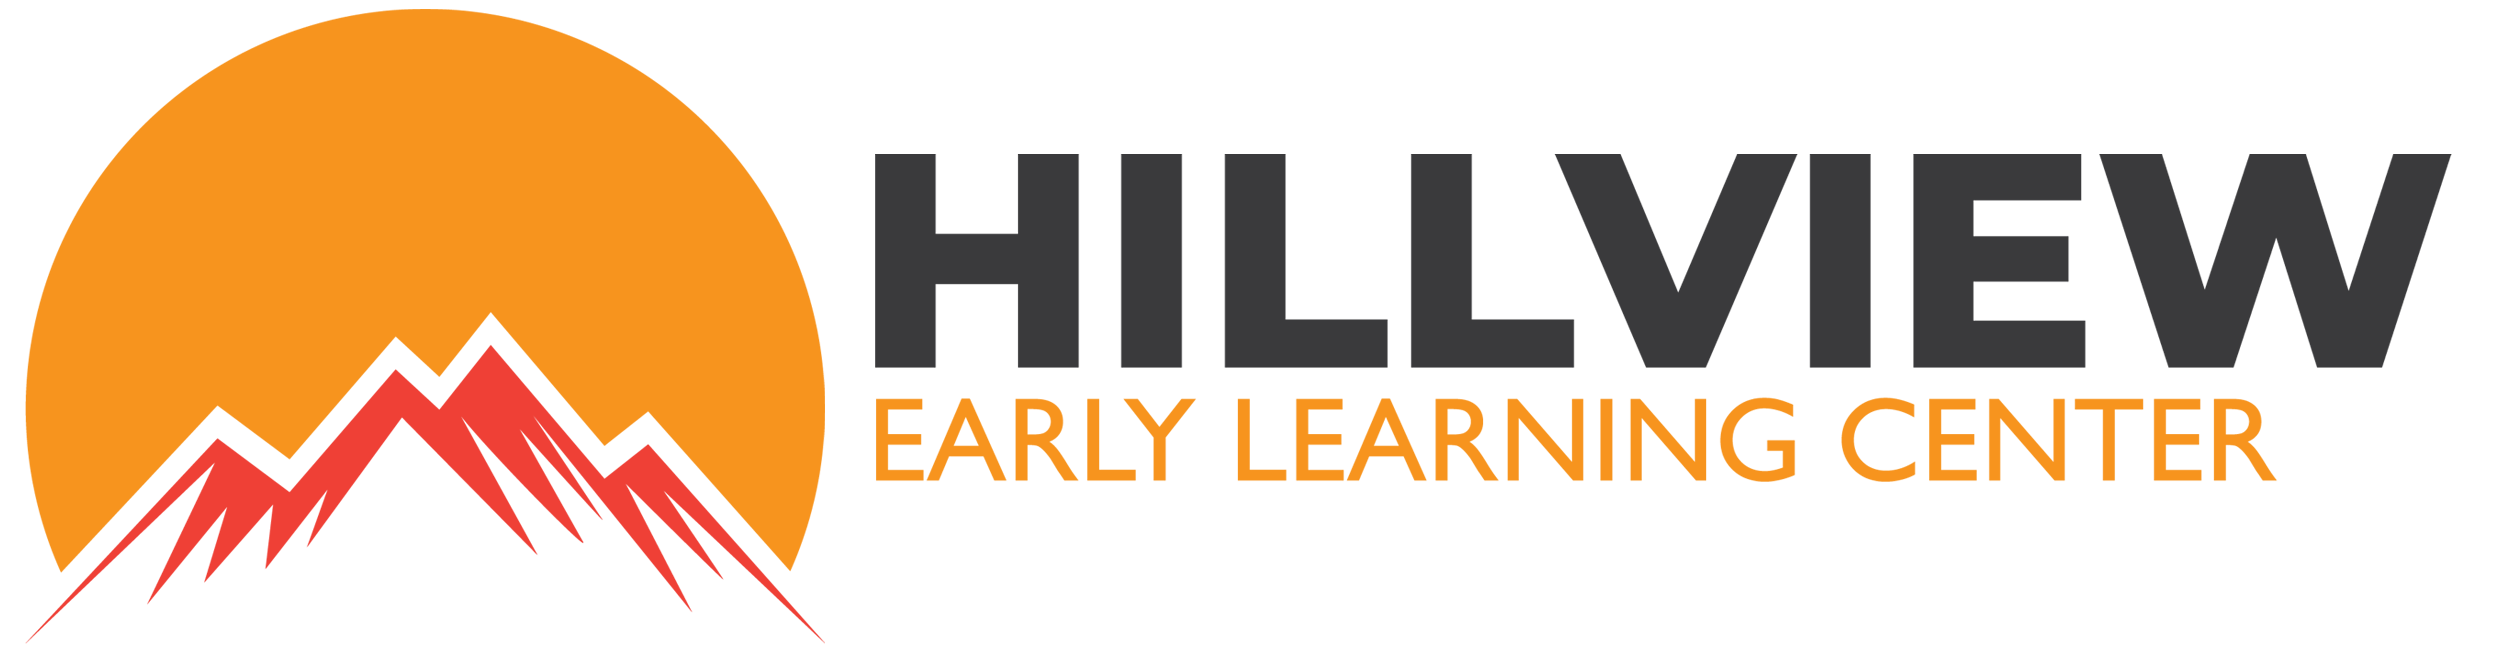 Hillview Early Learning Center